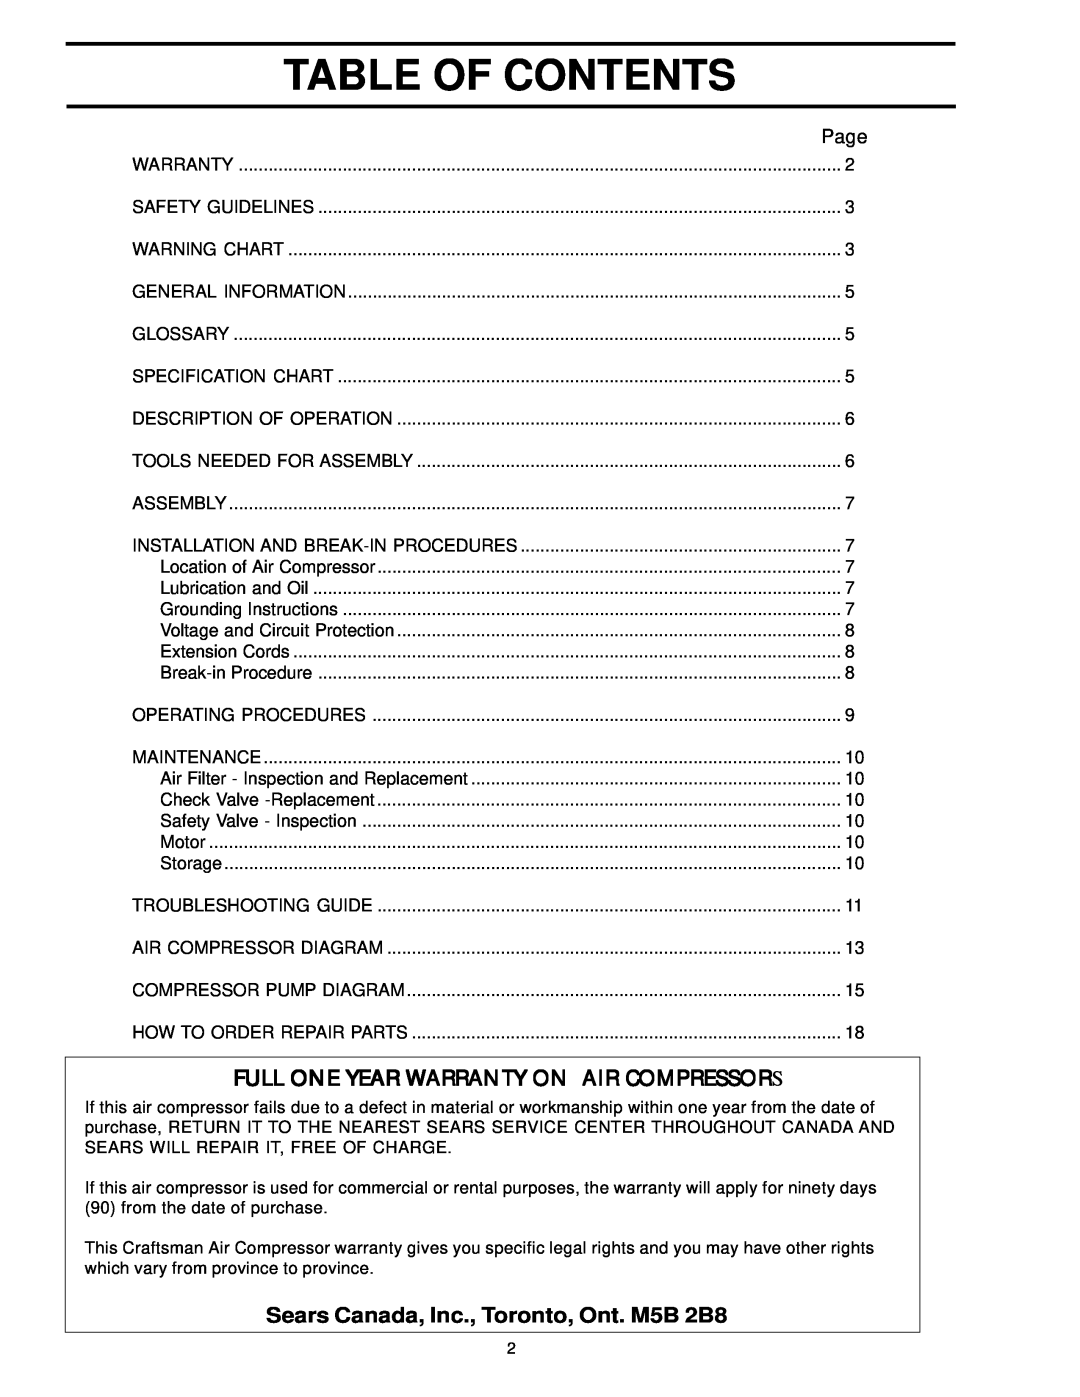 Sears 919.72512 Table Of Contents, Full One Year Warranty On Air Compressors, Sears Canada, Inc., Toronto, Ont. M5B 2B8 